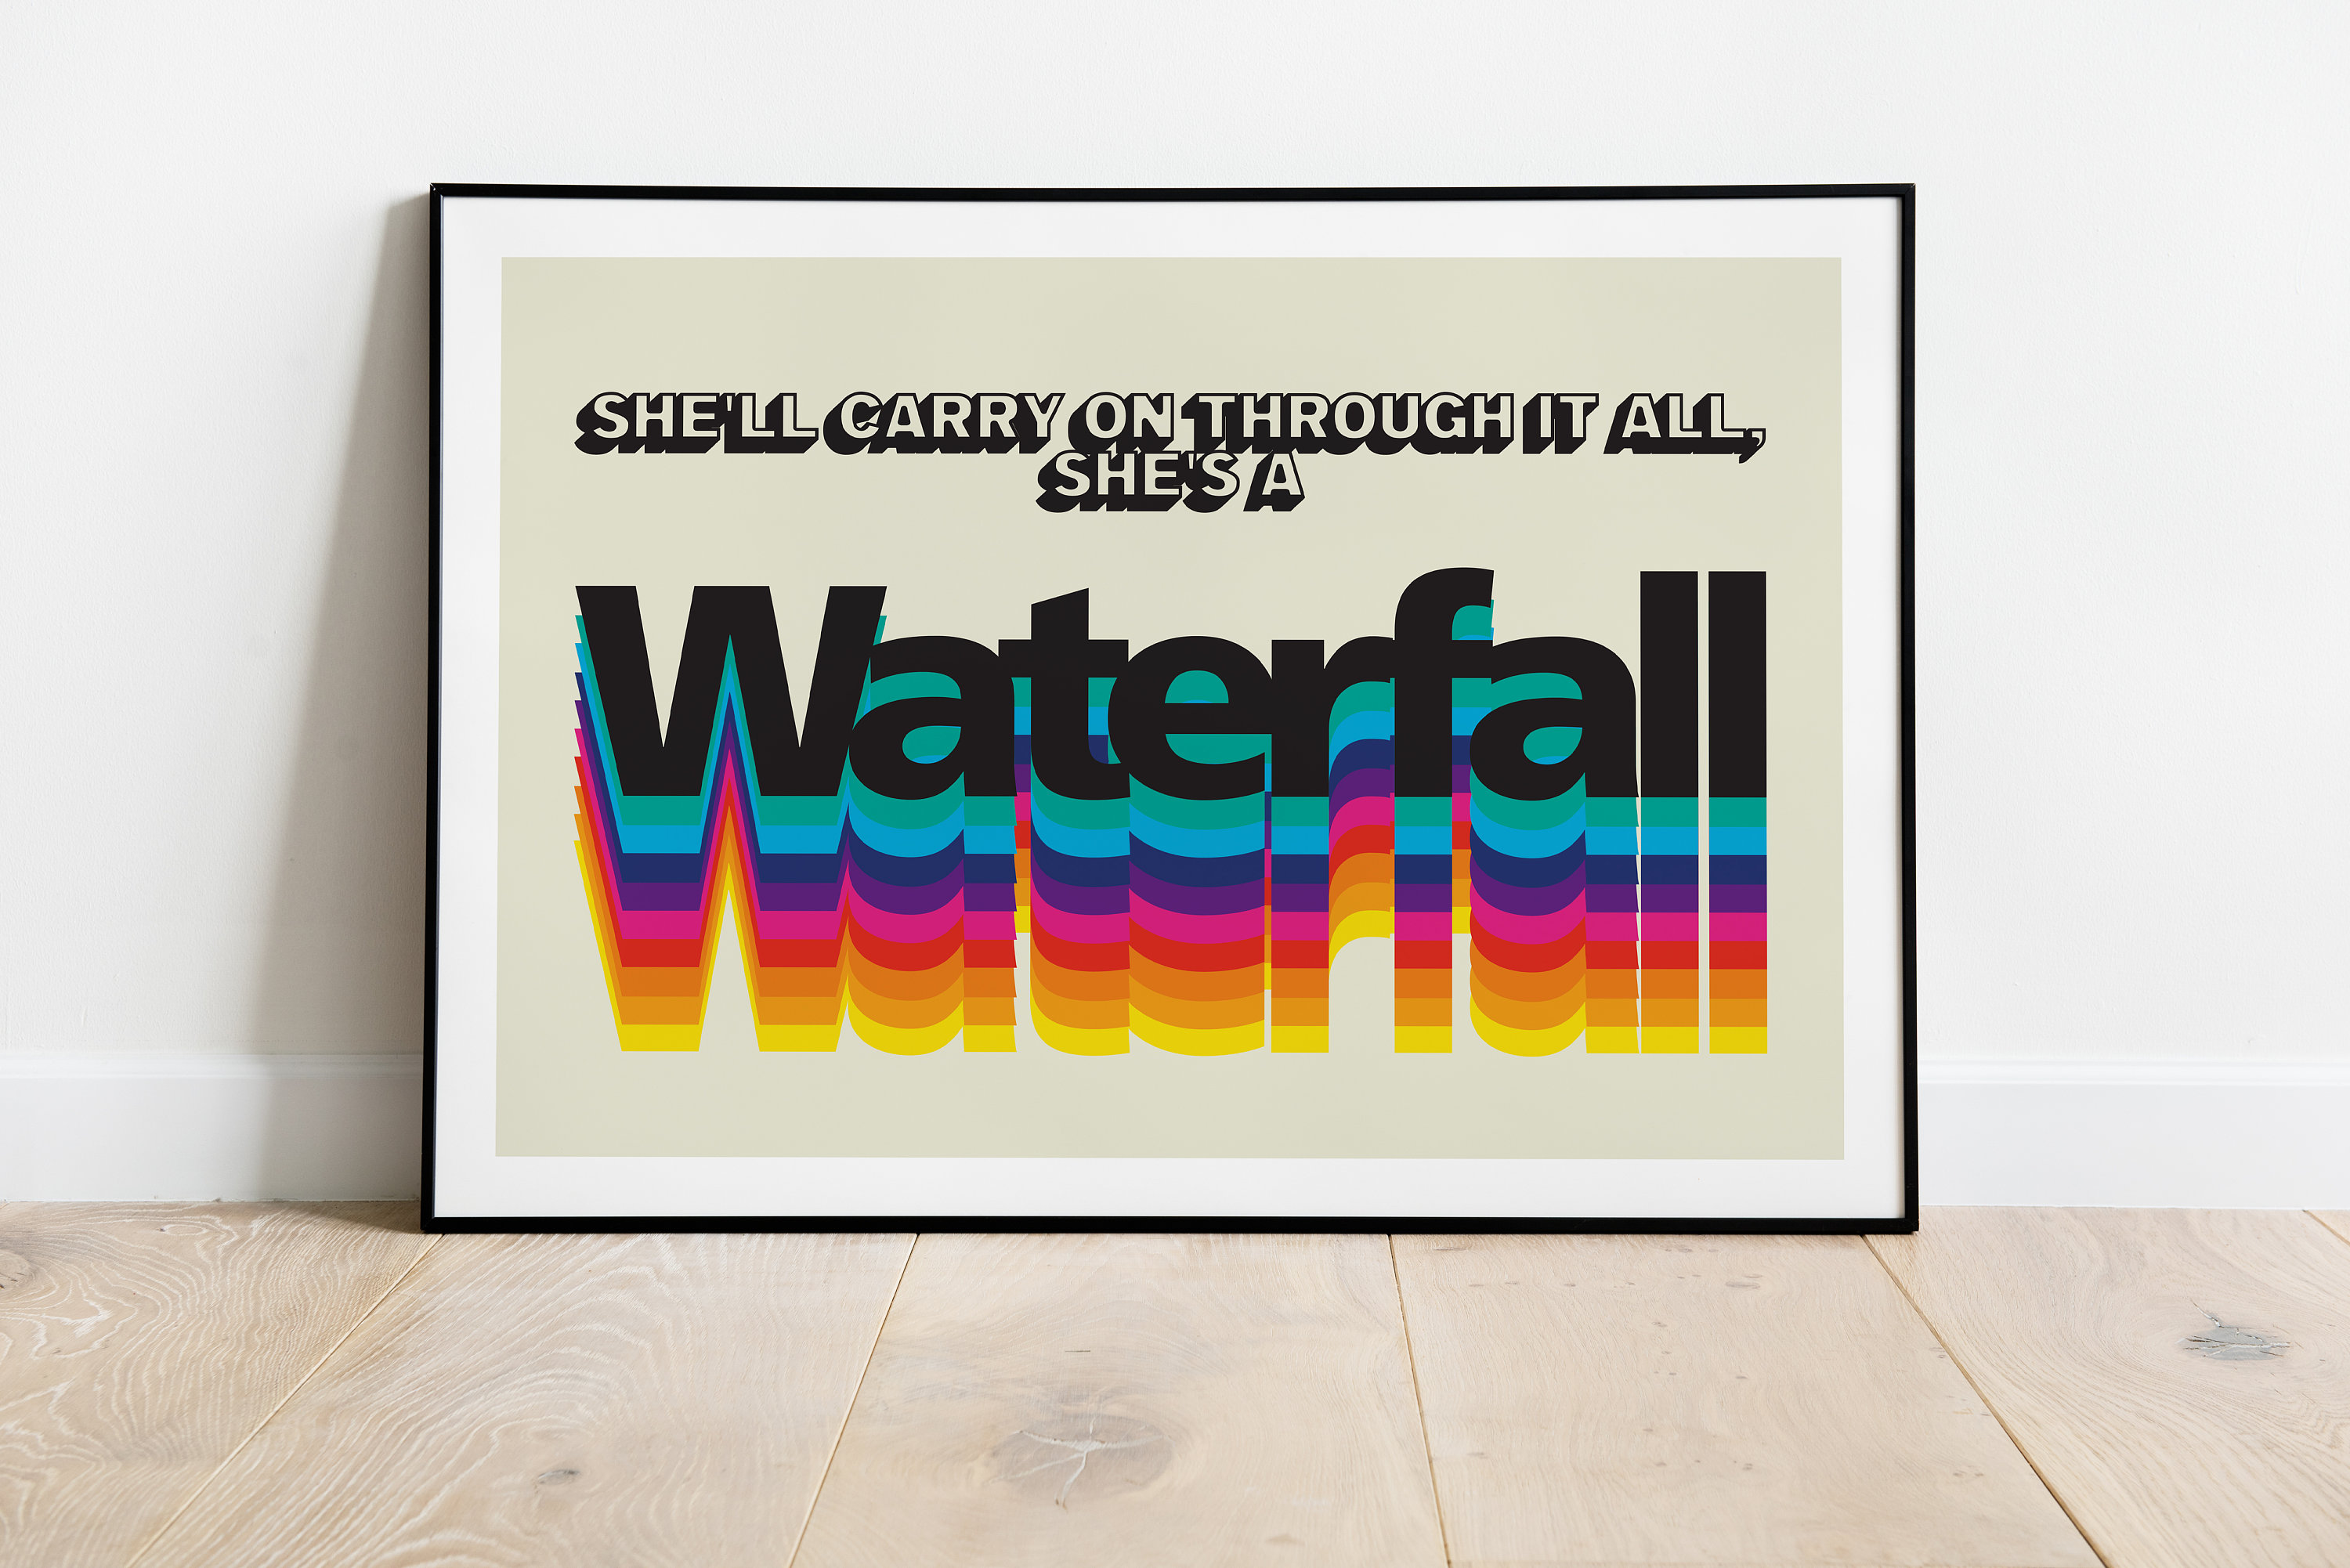 Waterfall  Stone Roses  Lyrics Print  A3 A4 A5  Manchester Indie Rock Band Music Art  Concert Typographic Poster  Gift